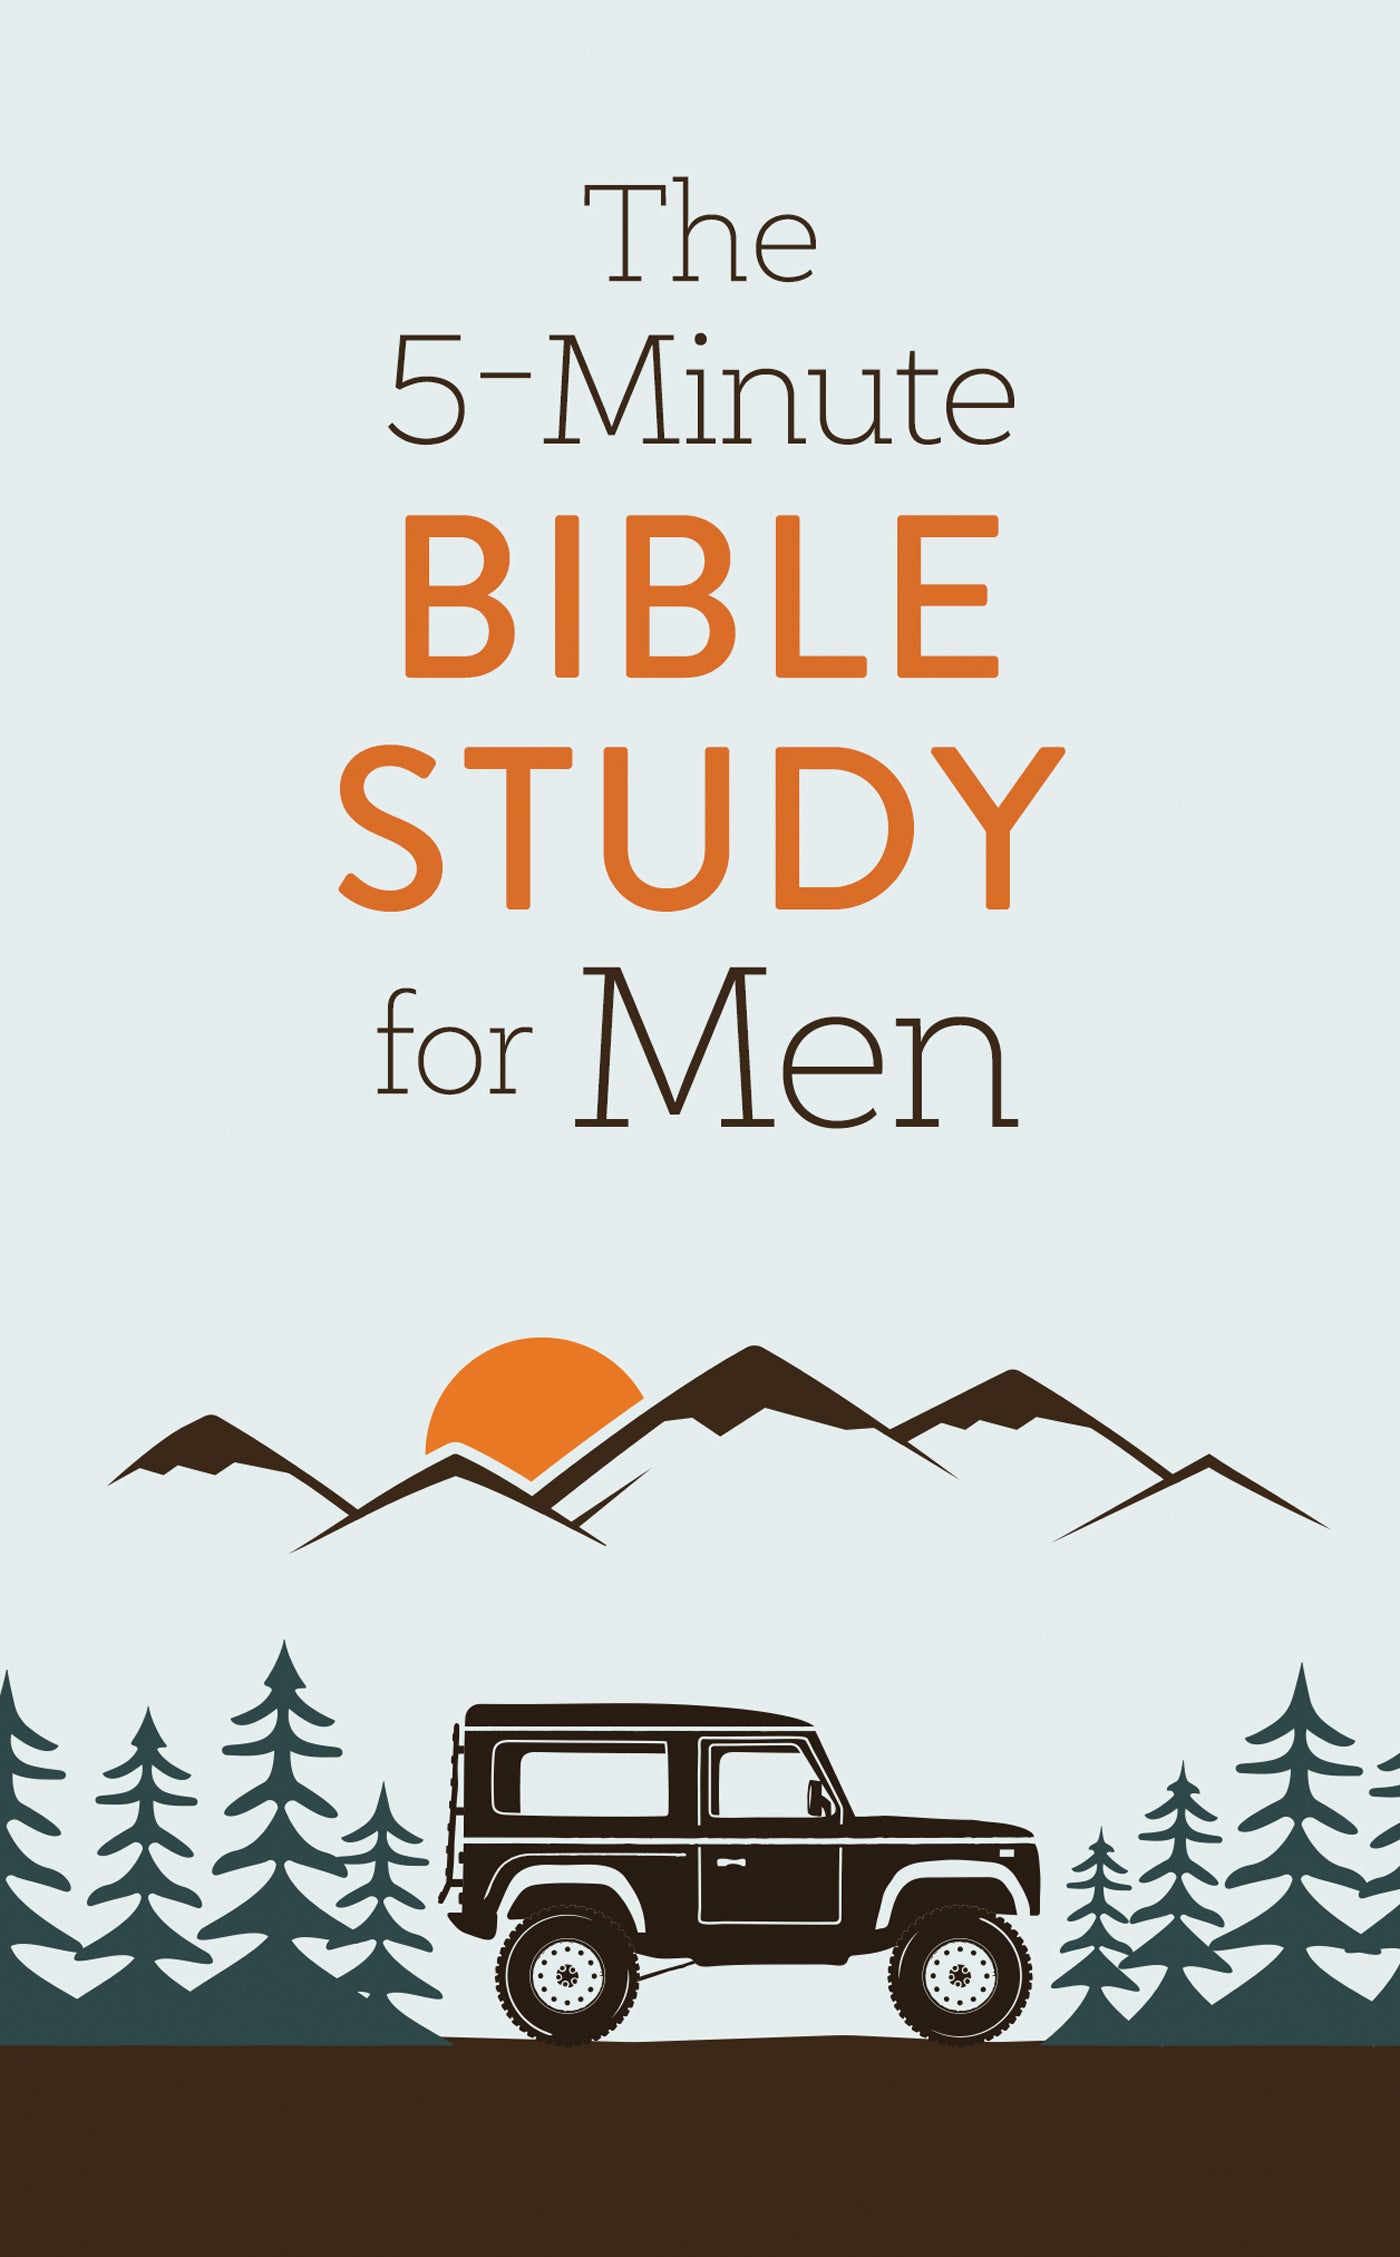 Image of 5-Minute Bible Study for Men other